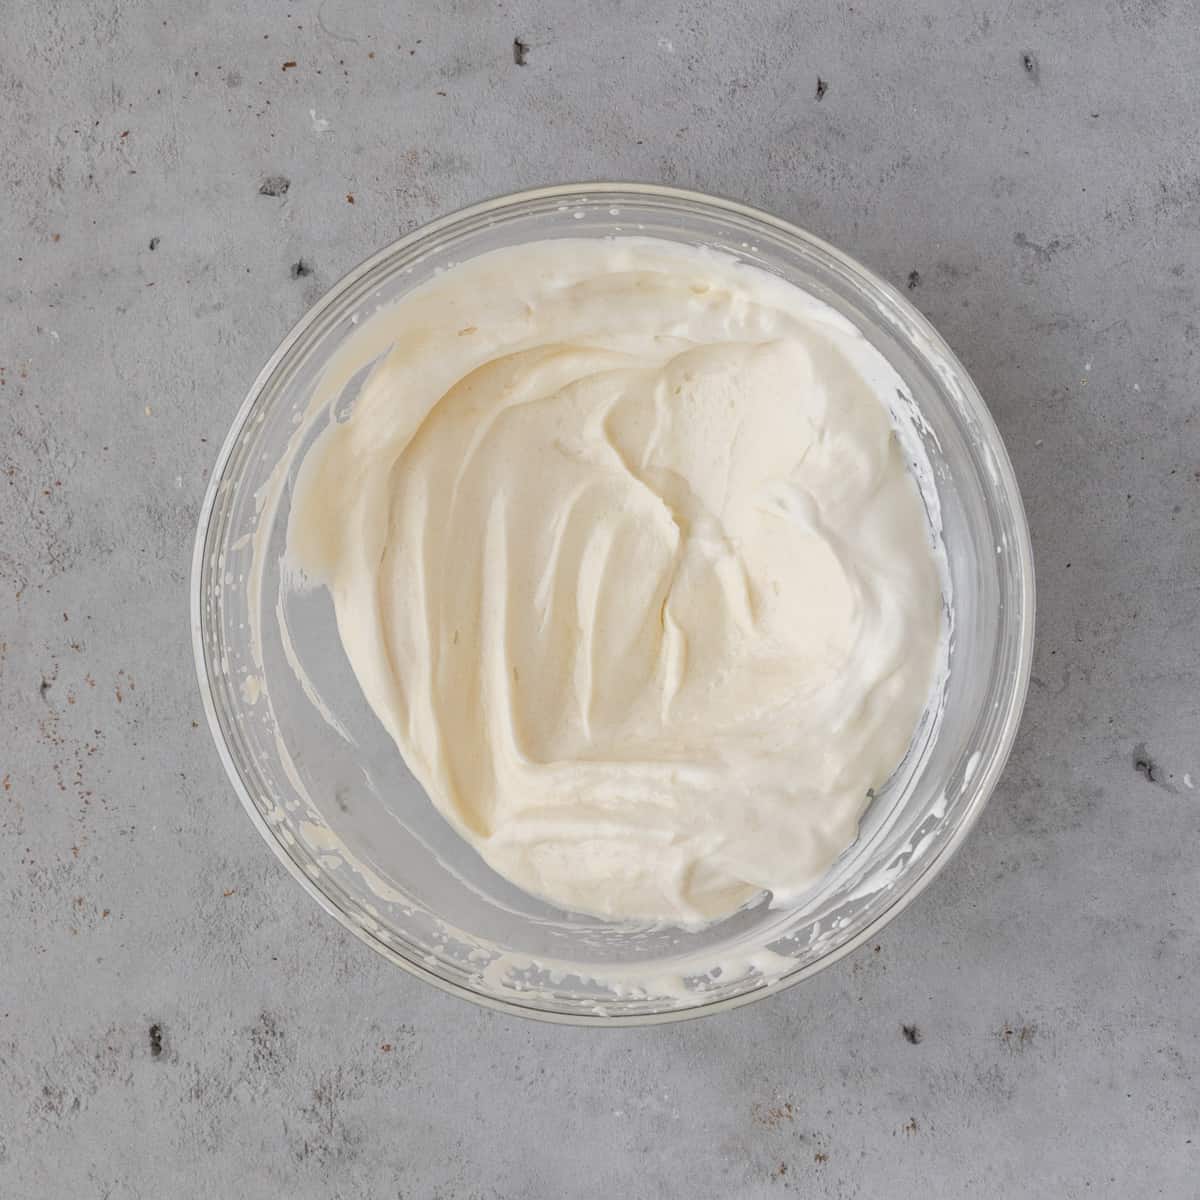 the whipped cream cheese icing in a glass bowl on a grey background